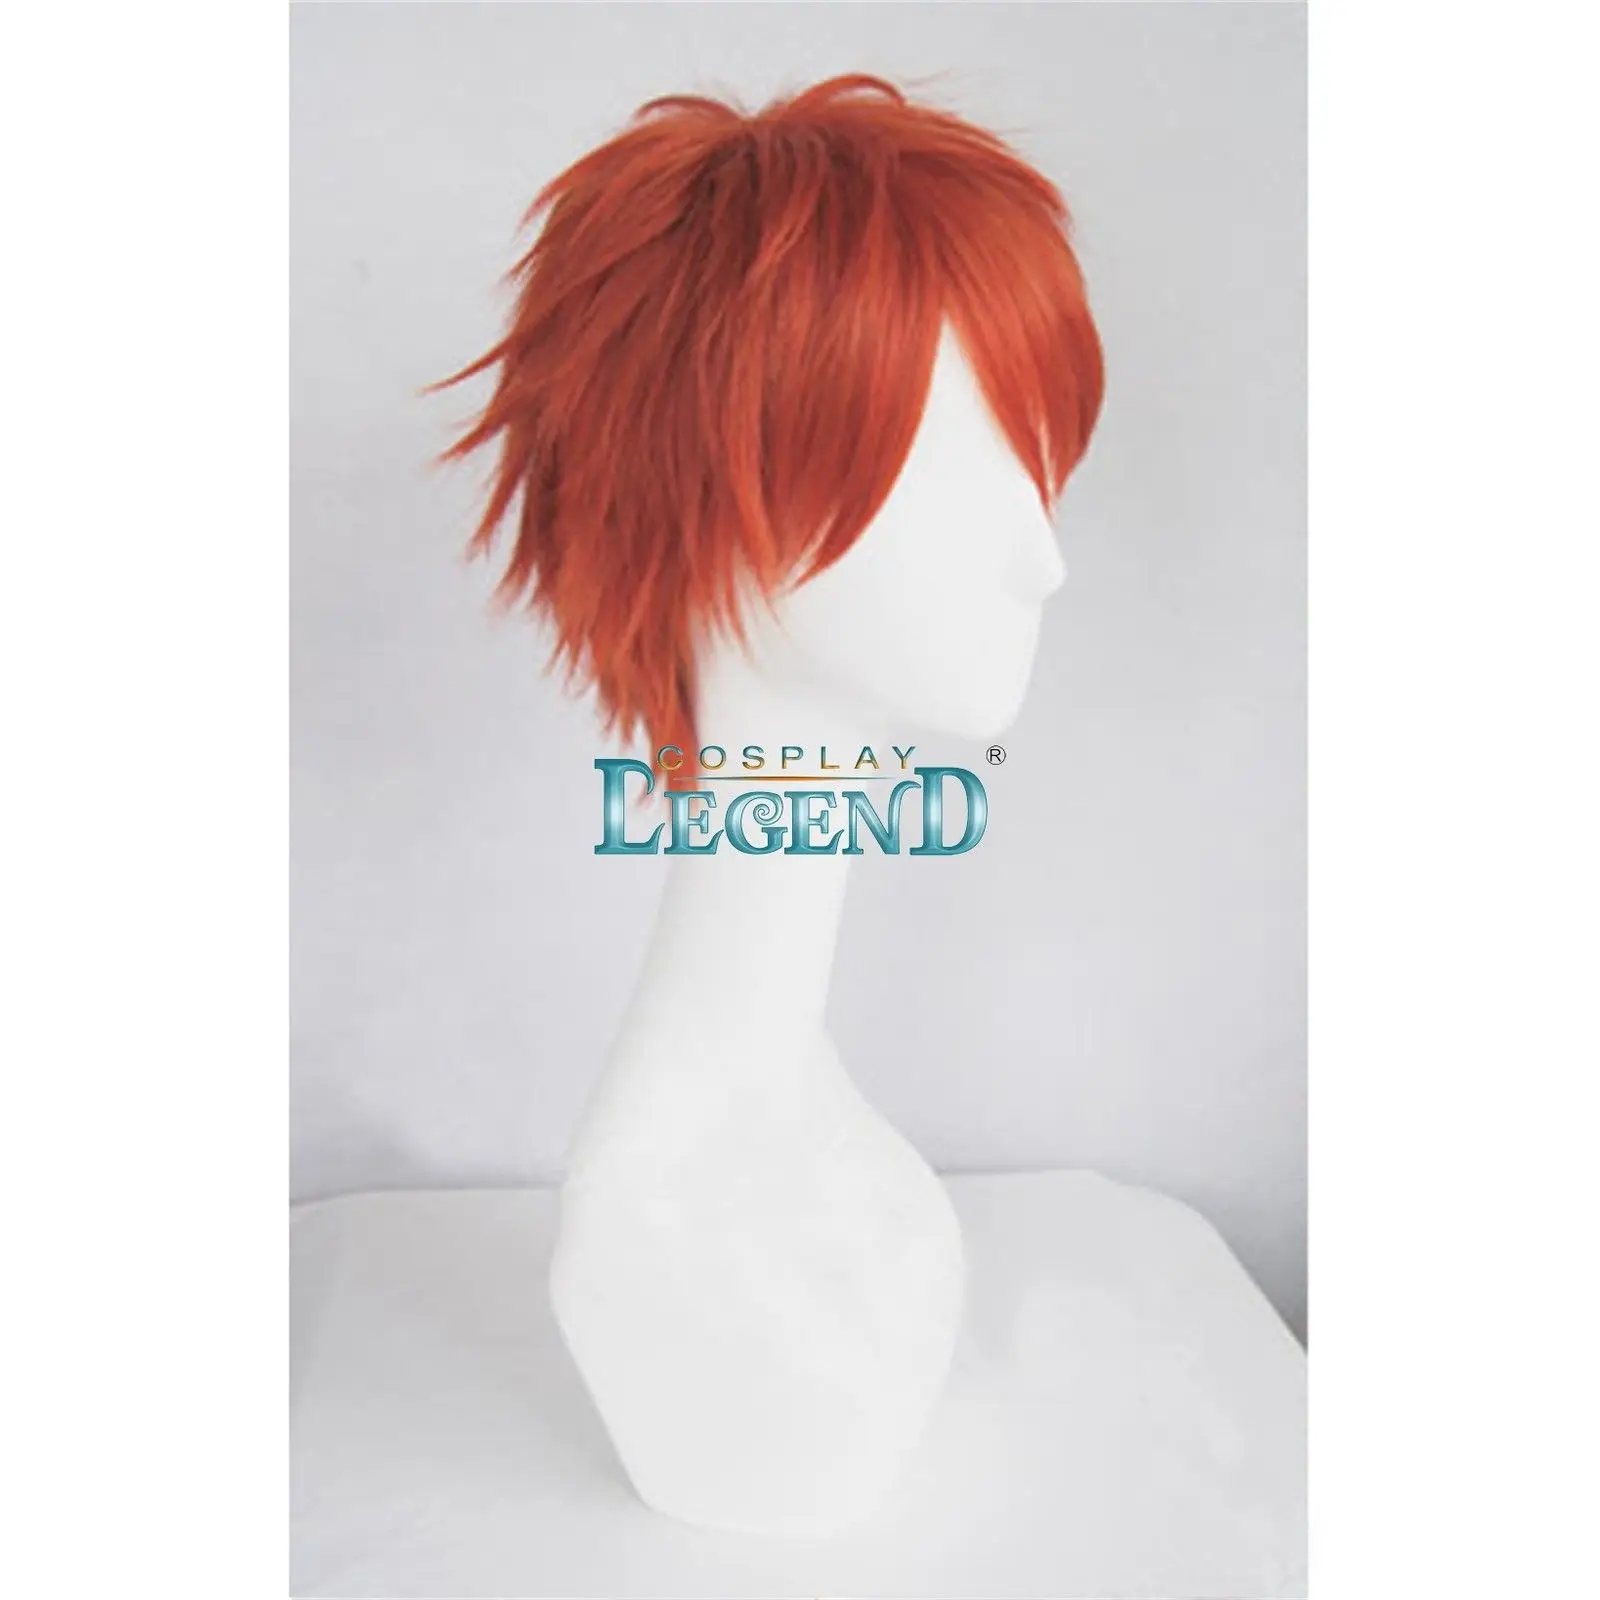 Mystic Messenger 707 Game Costume Cosplay Wig Free Track Free Wig Cap